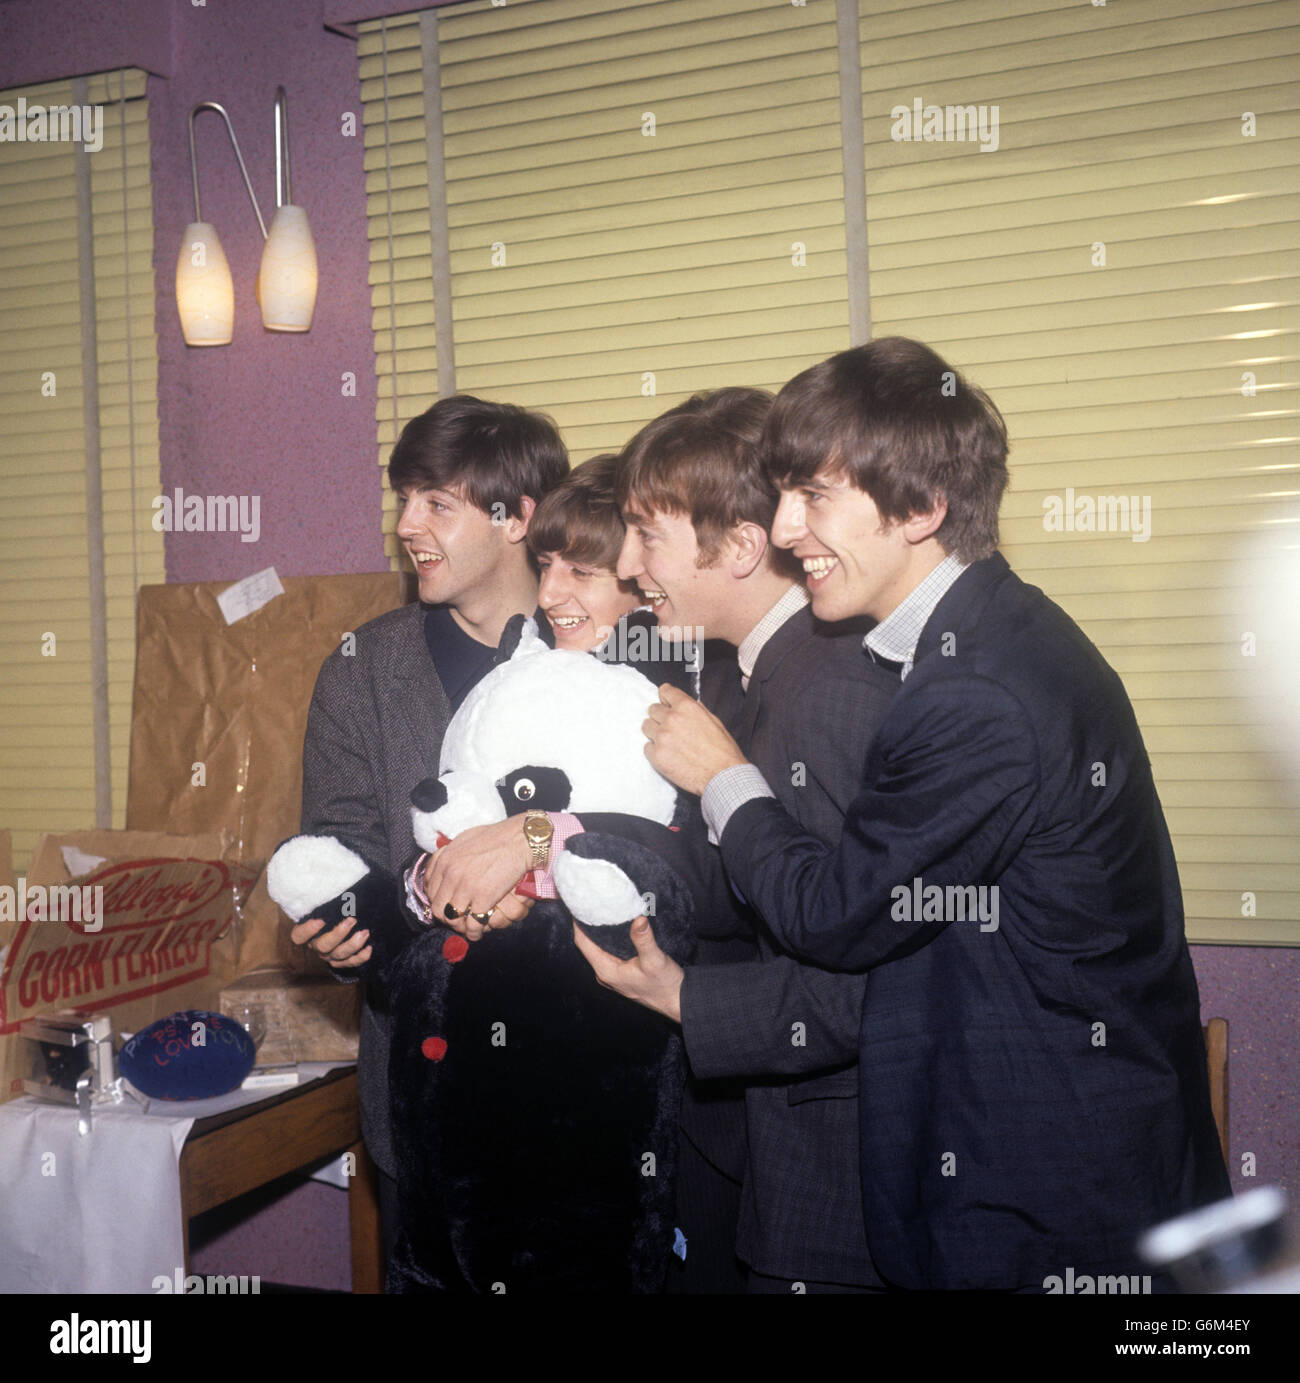 Musik - The Beatles - Manchester. Die Beatles Backstage in Manchester Stockfoto